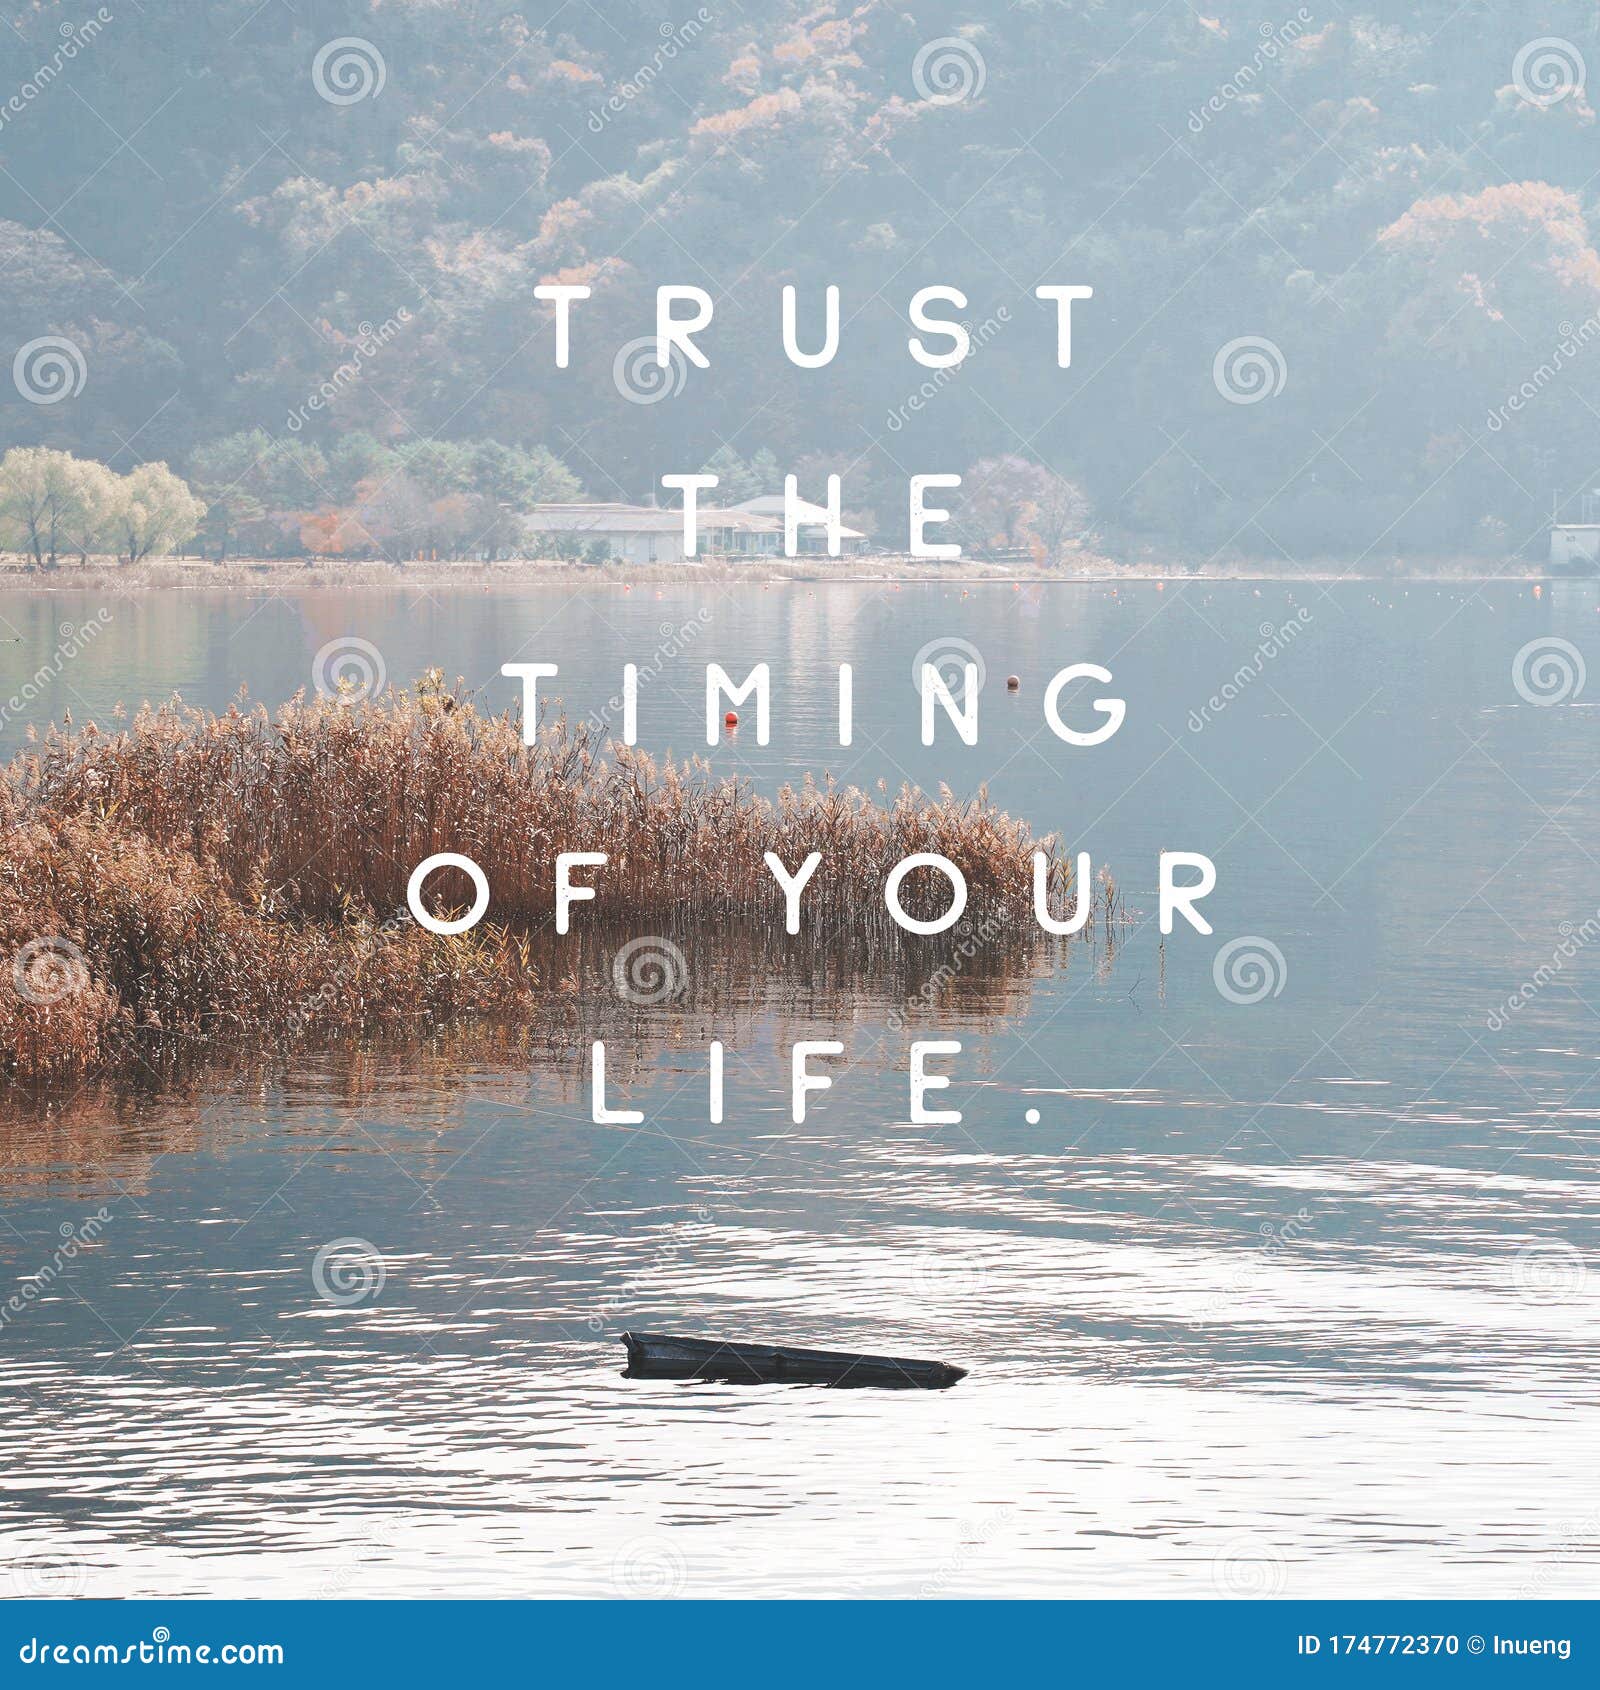 List 93+ Images trust the timing of your life quotes Sharp